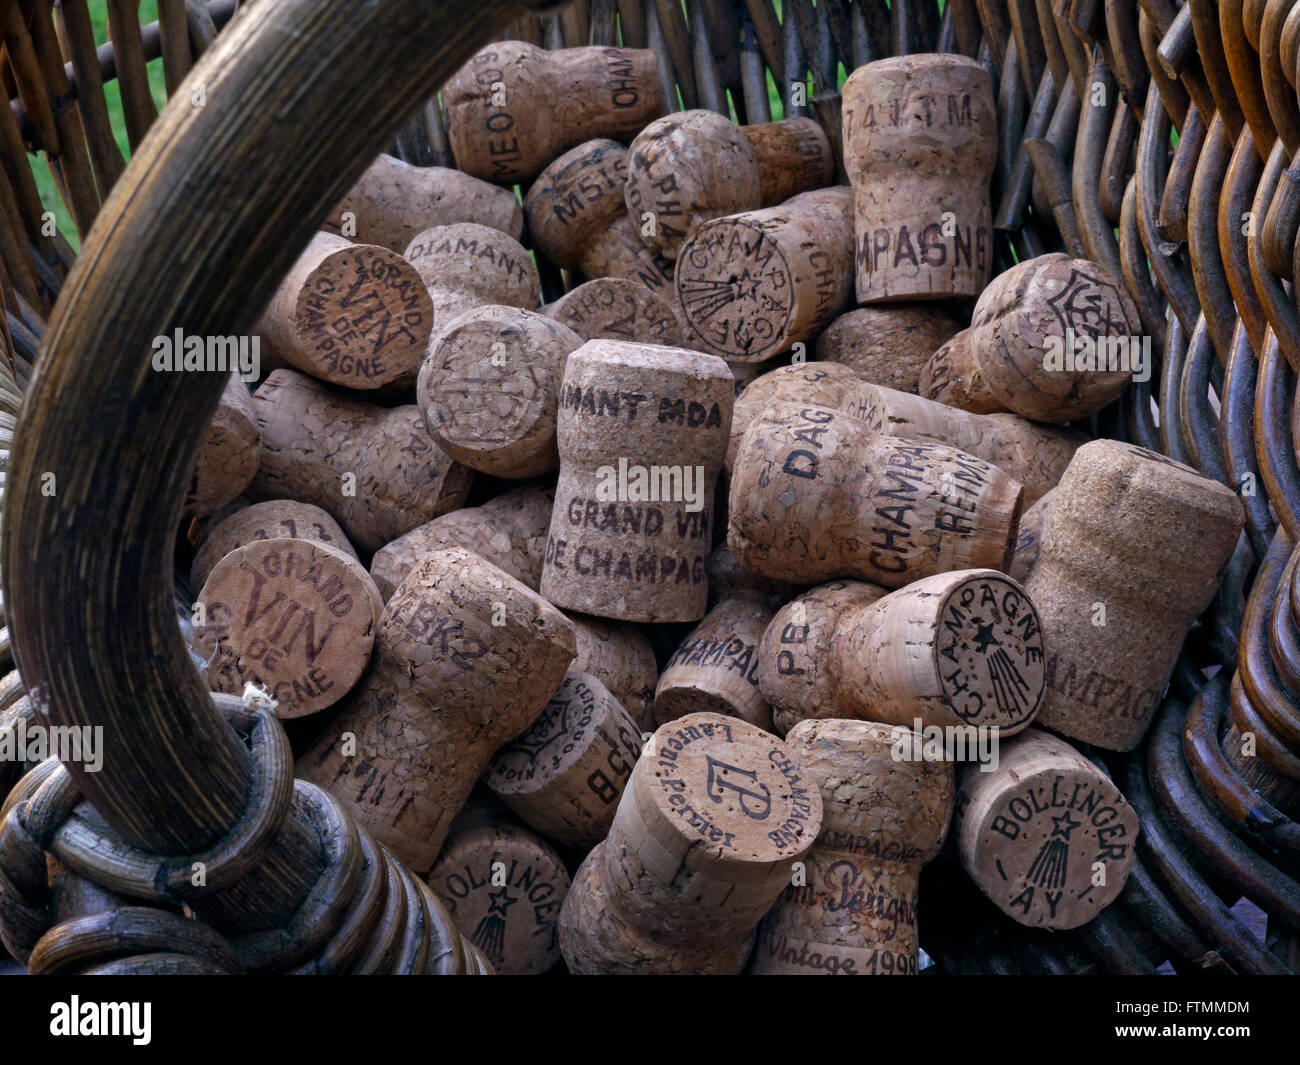 CHAMPAGNE CORKS HARVEST CONCEPT image of French grape pickers harvest basket with quality selection of various luxury champagne corks France Stock Photo